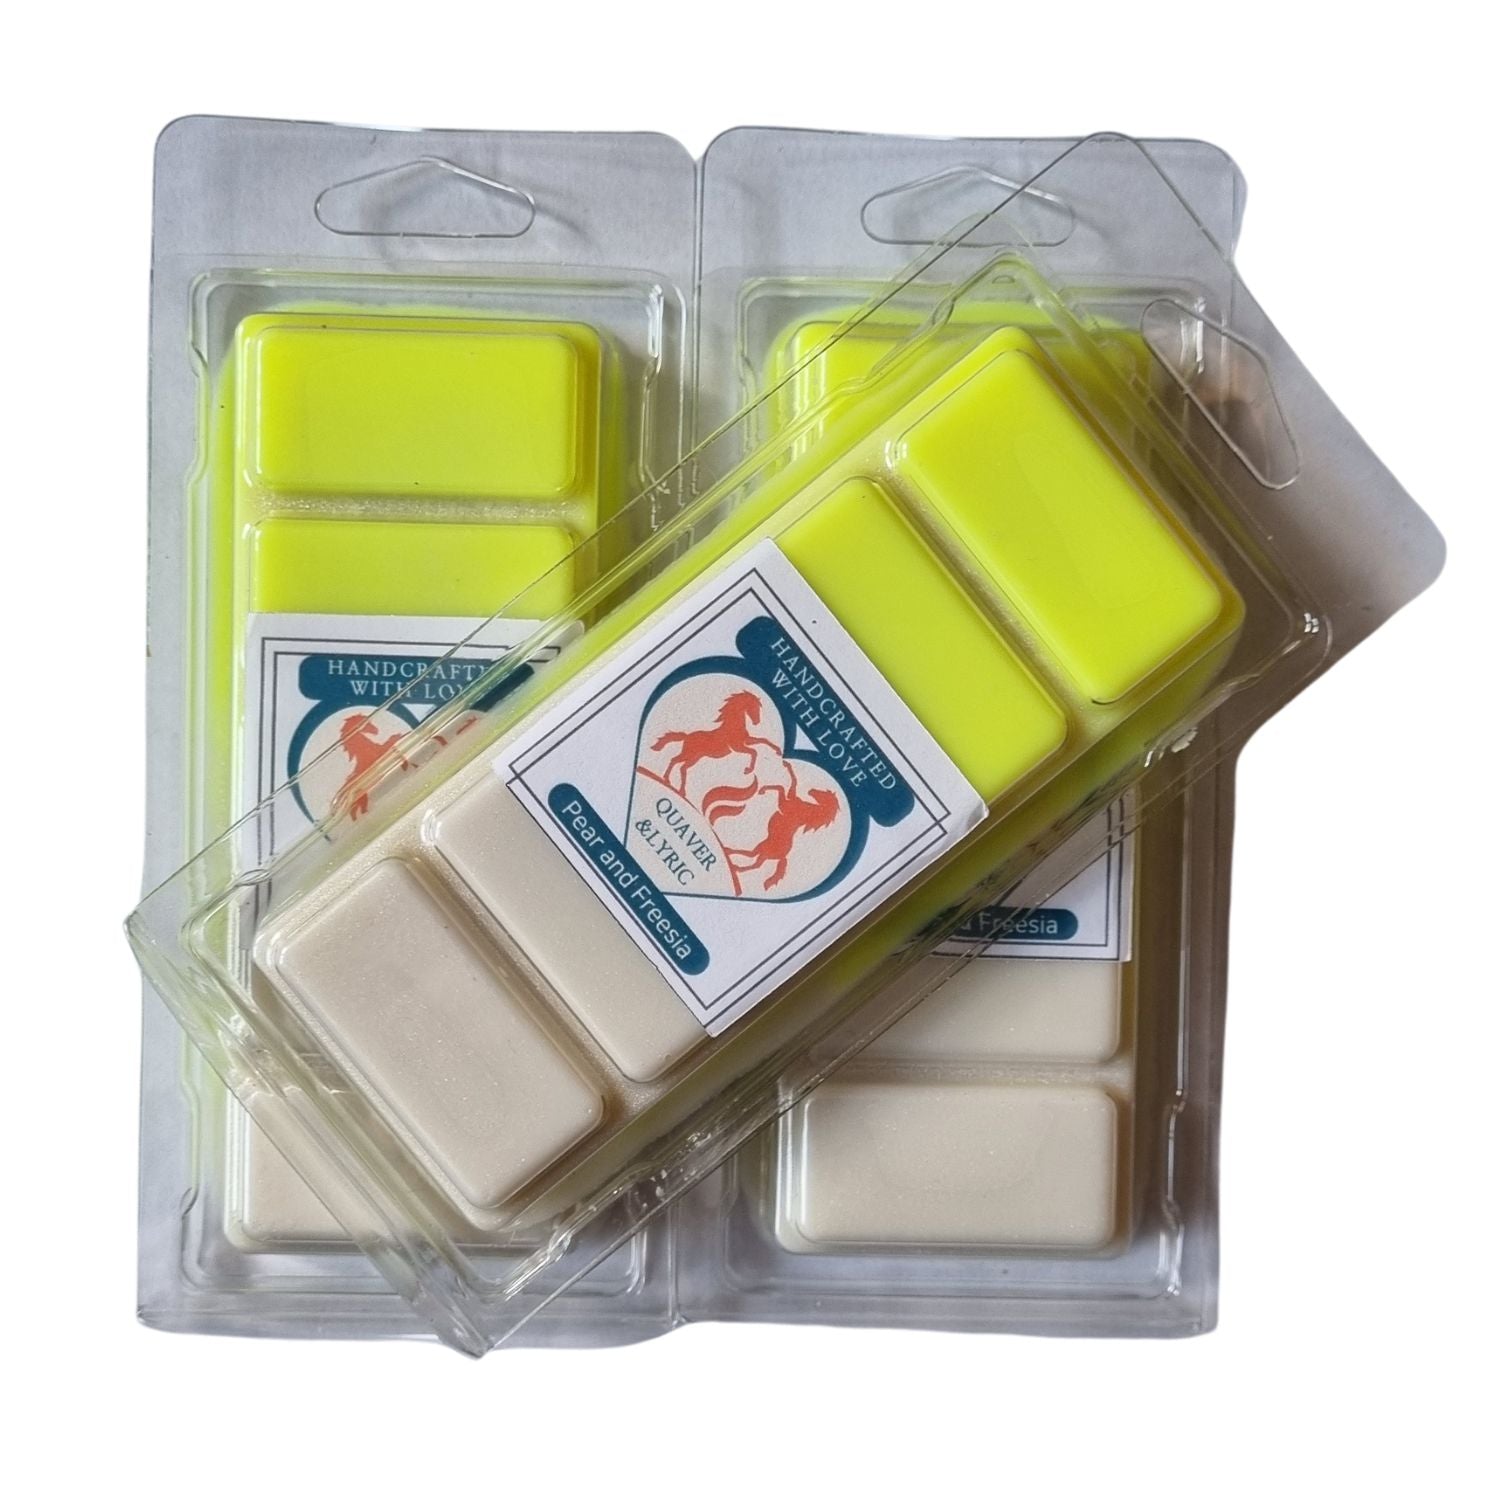  a group of 3 bright yellow and white wax melts in clamshells with quaver and lyric rearing horse branding